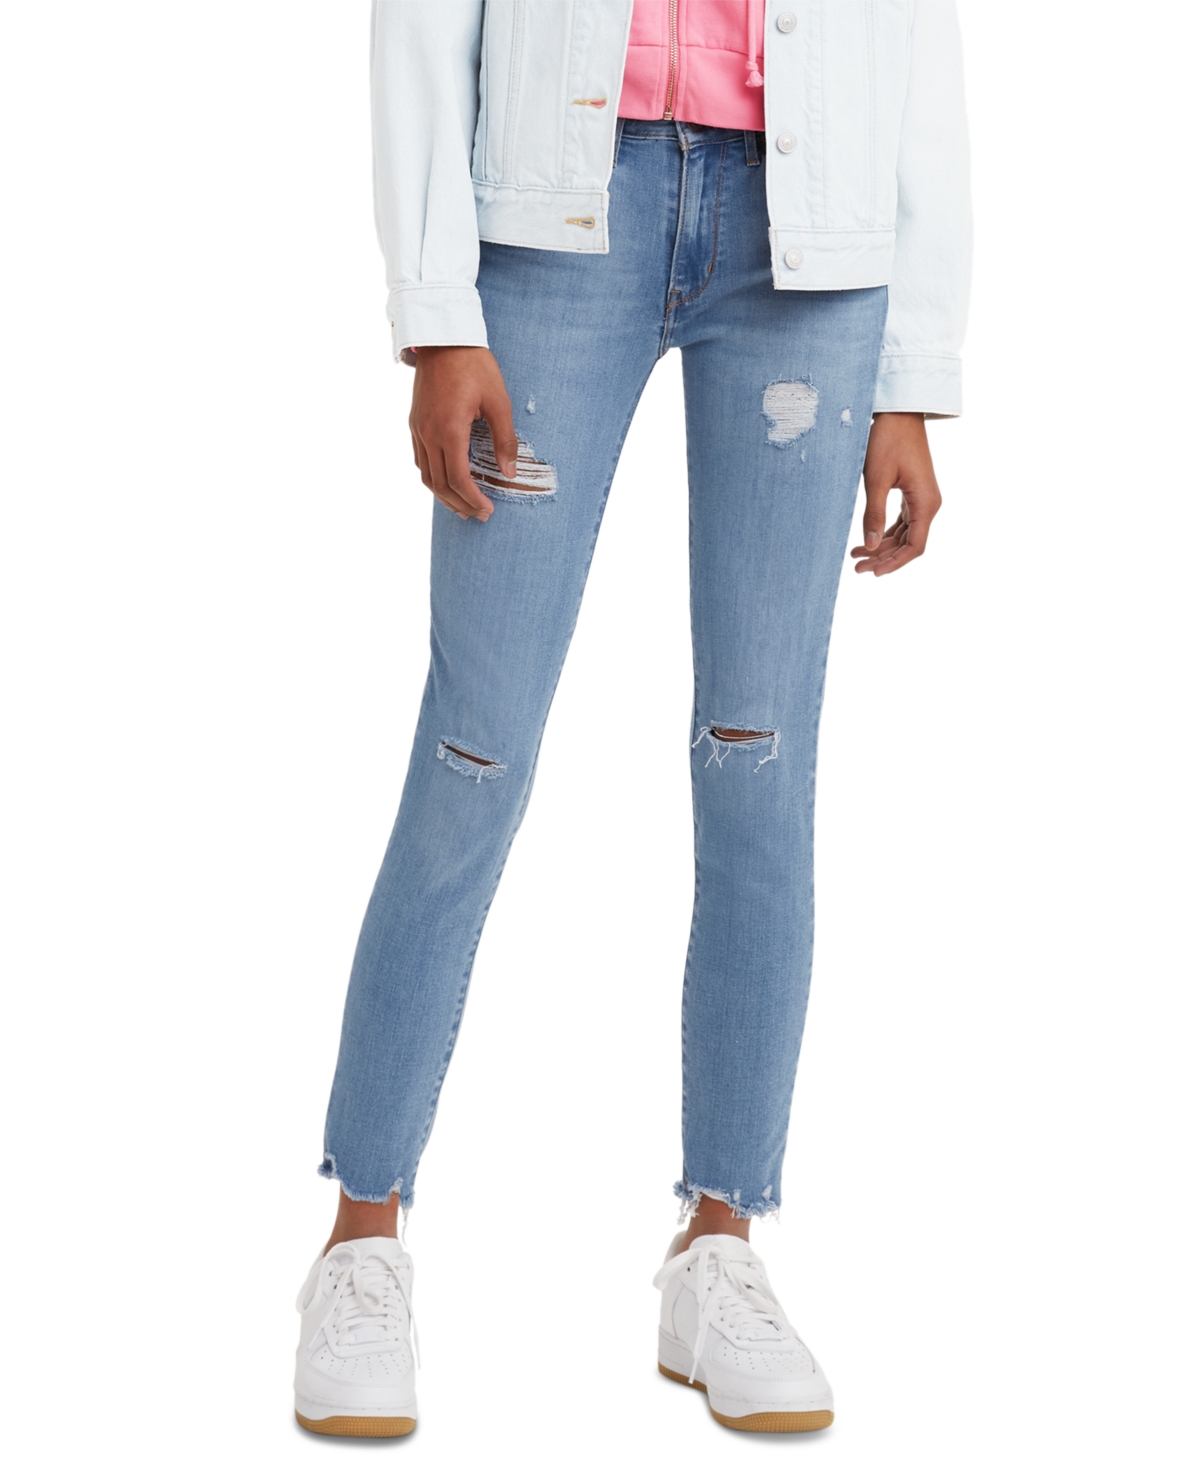 Women's 721 High-Rise Stretch Skinny Jeans - Blue Story